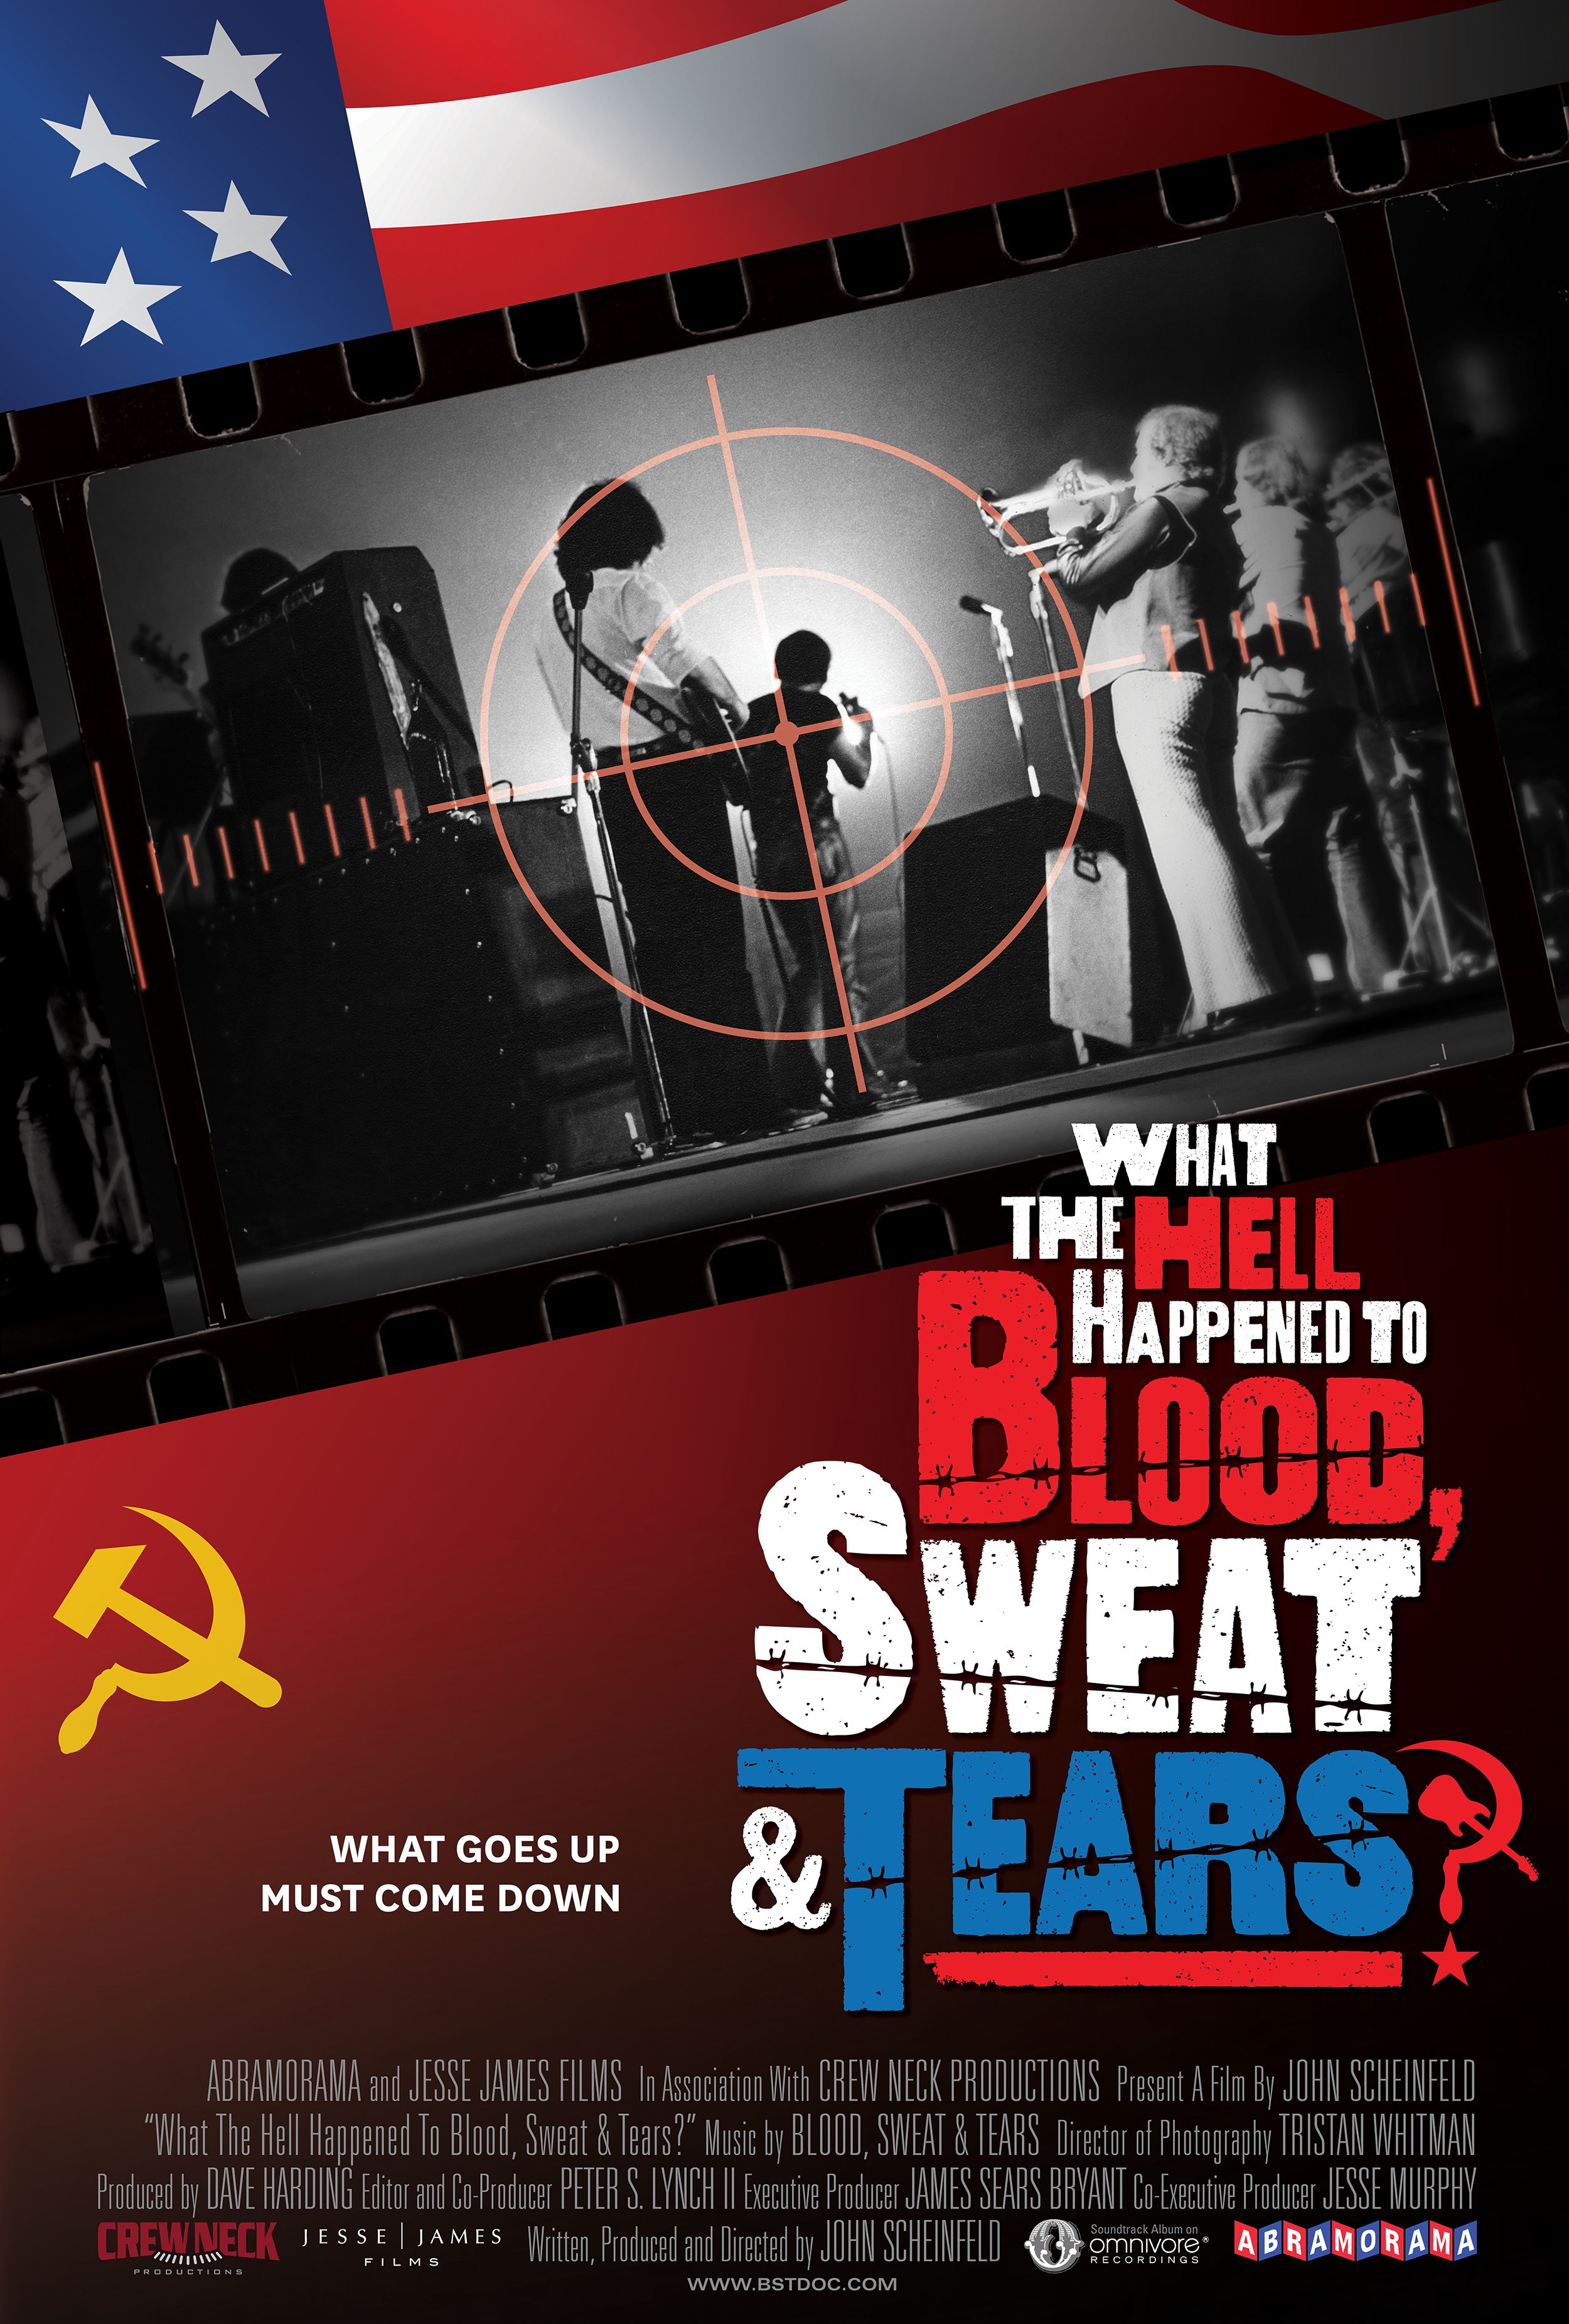 New Doc Asks What The Hell Occurred To Blood, Sweat & Tears?